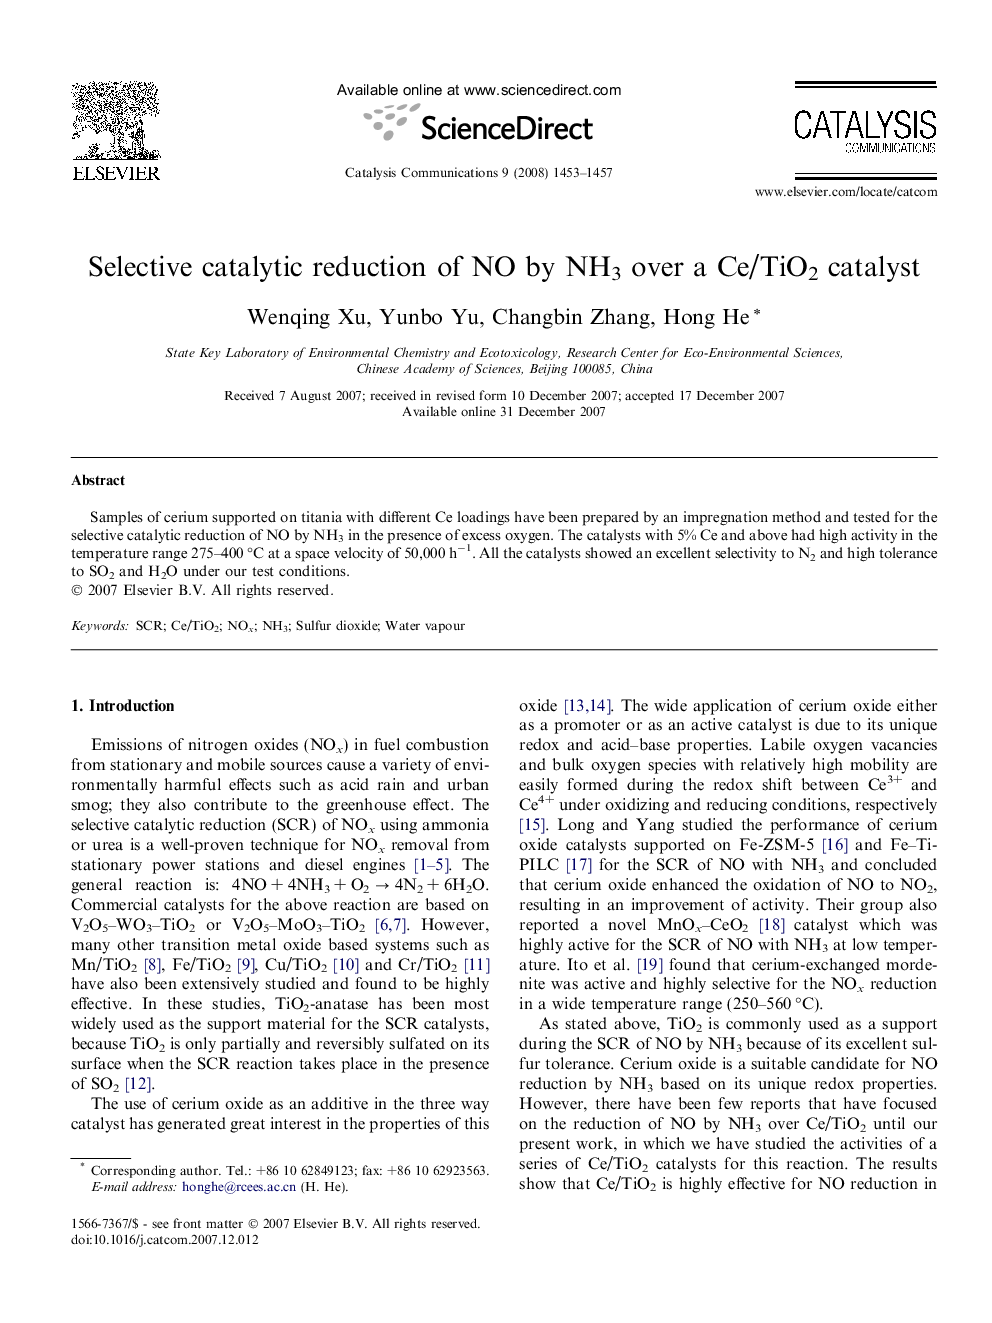 Selective catalytic reduction of NO by NH3 over a Ce/TiO2 catalyst